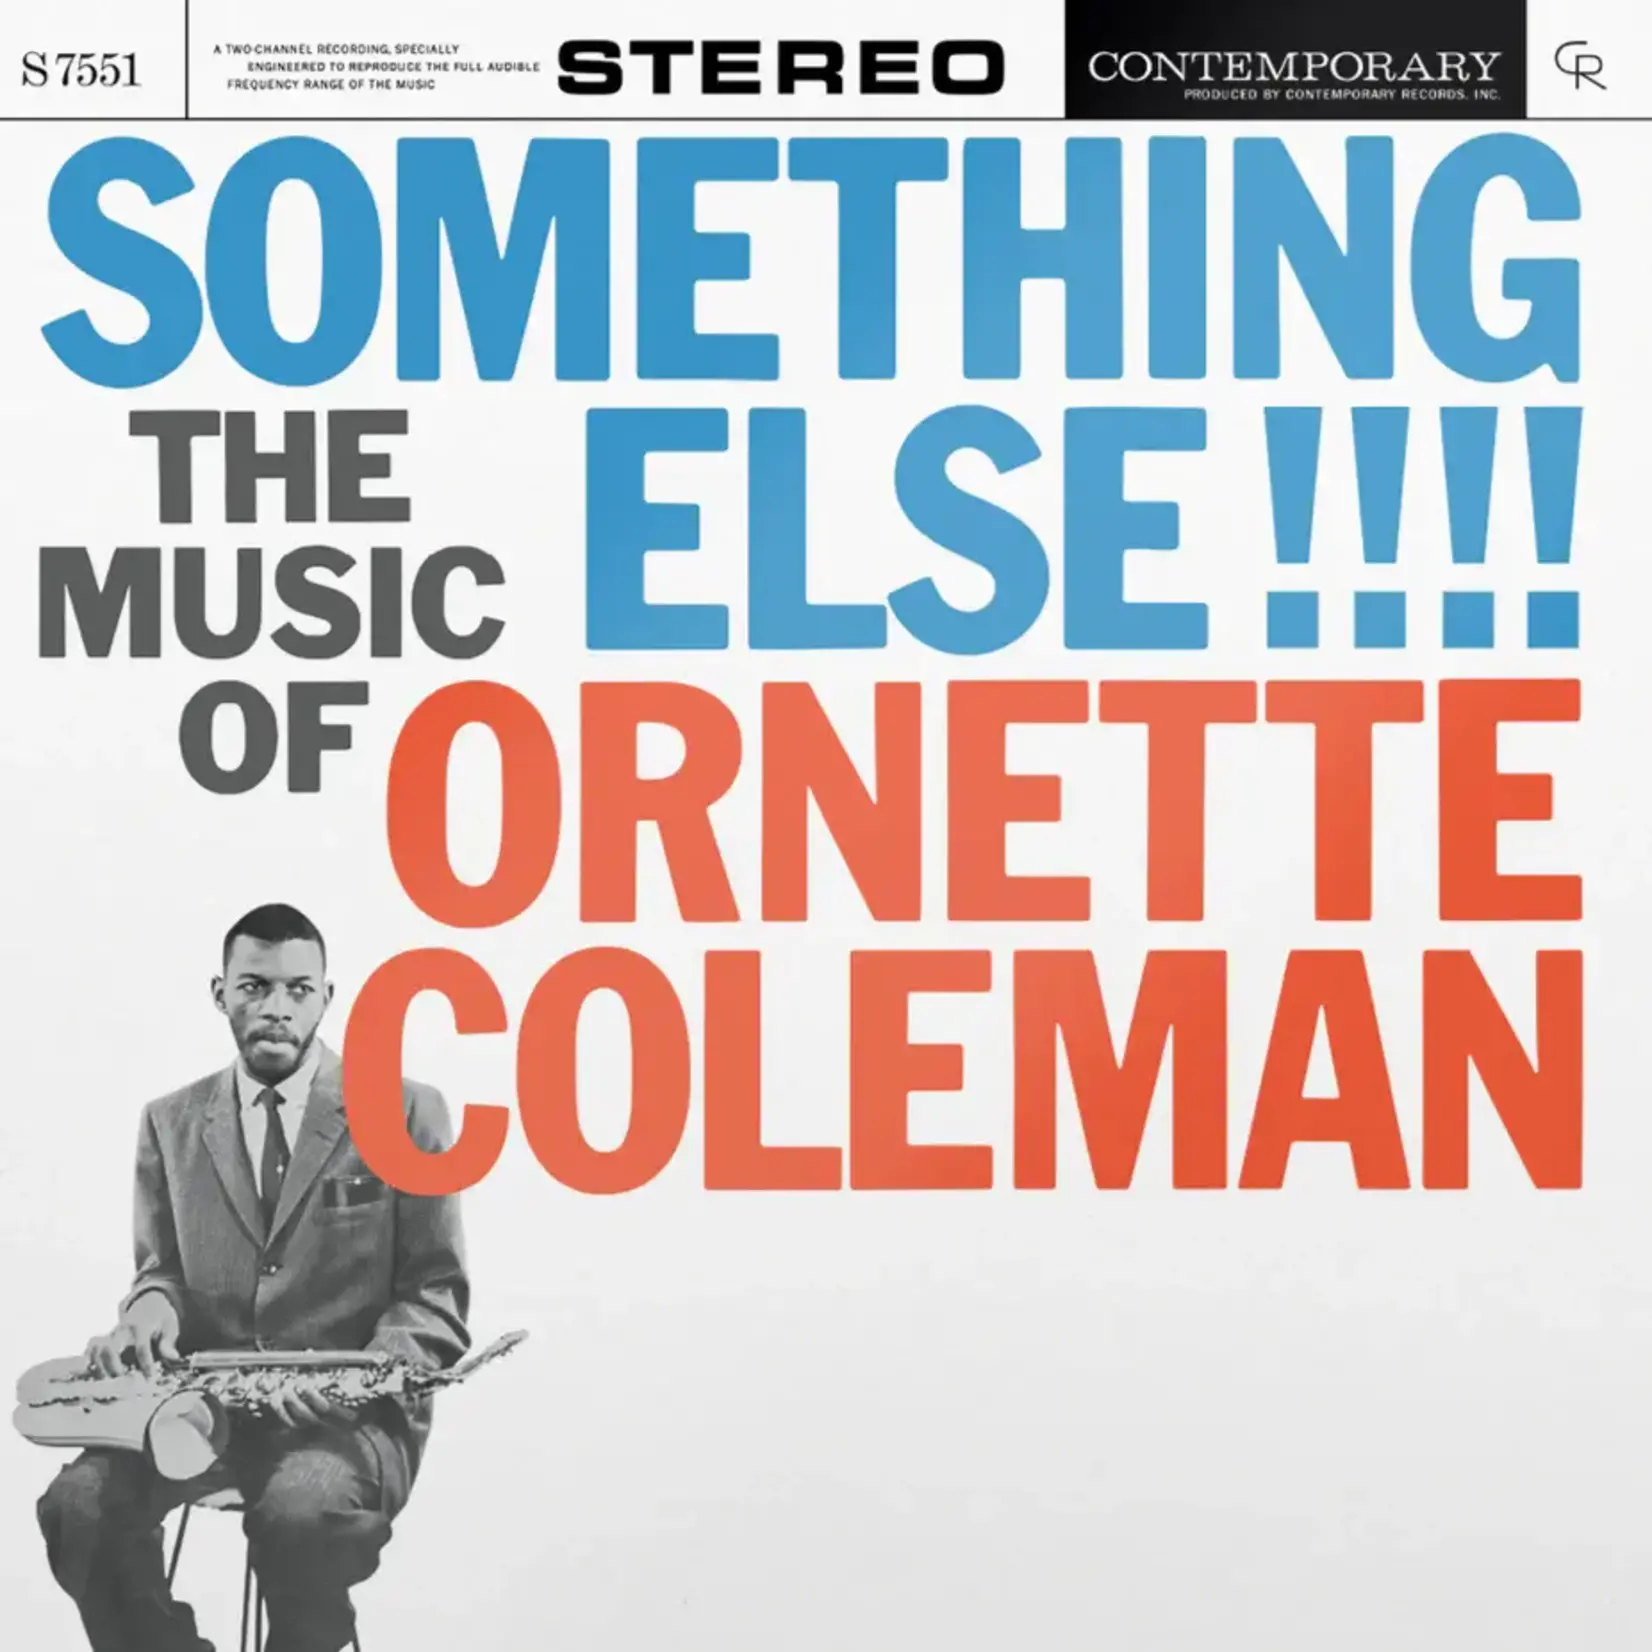 [New] Ornette Coleman - Something Else!!!! (Contemporary Records Acoustic Sounds series)